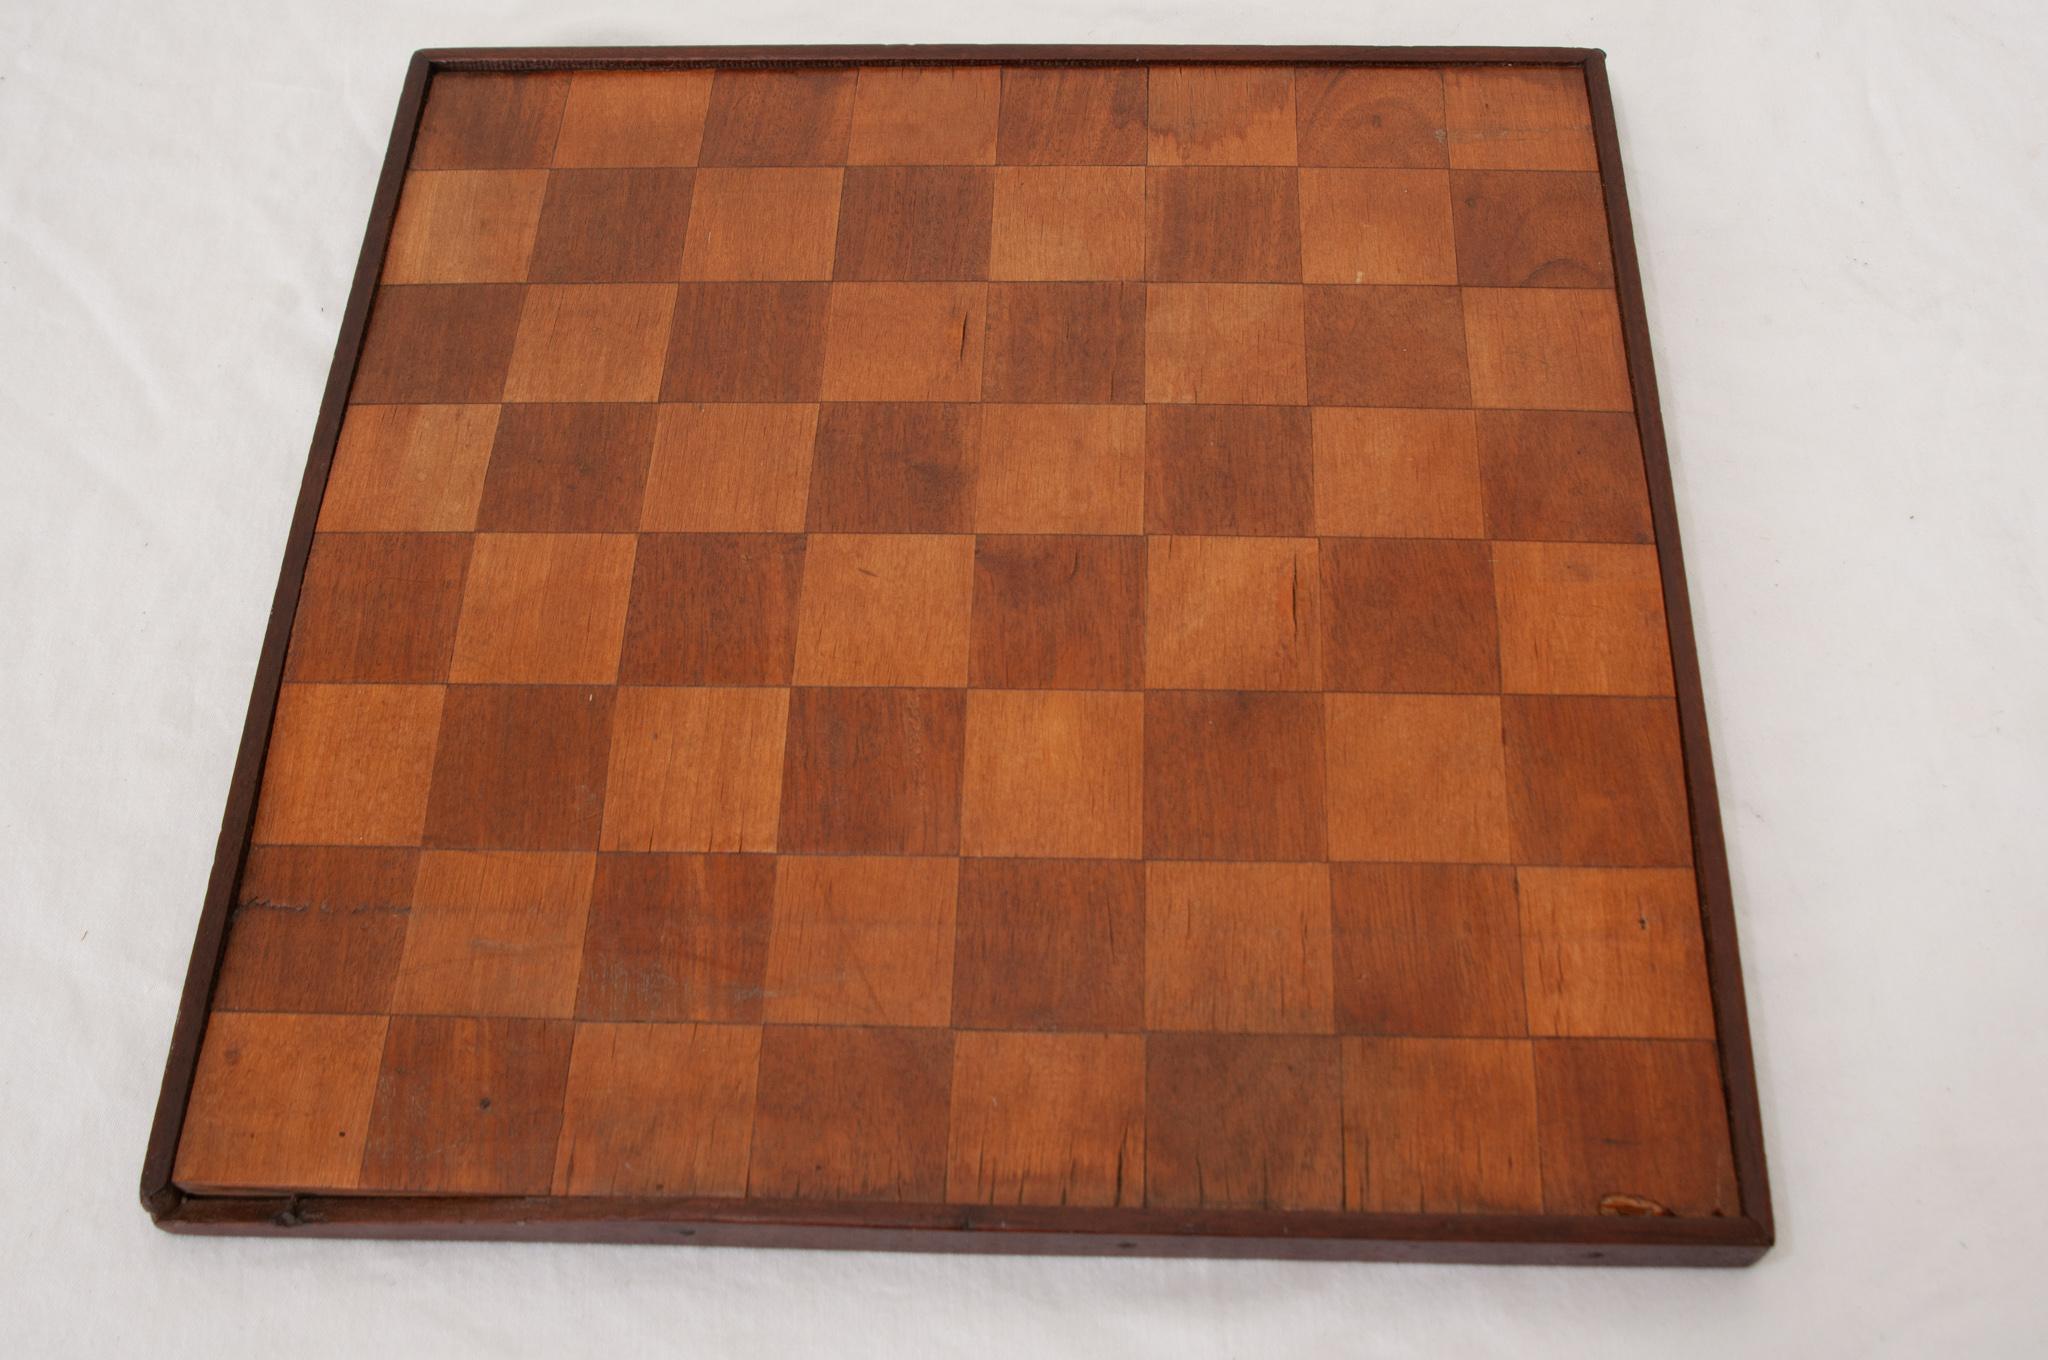 Hand-Carved Wooden 10 x 10 CheckerBoard